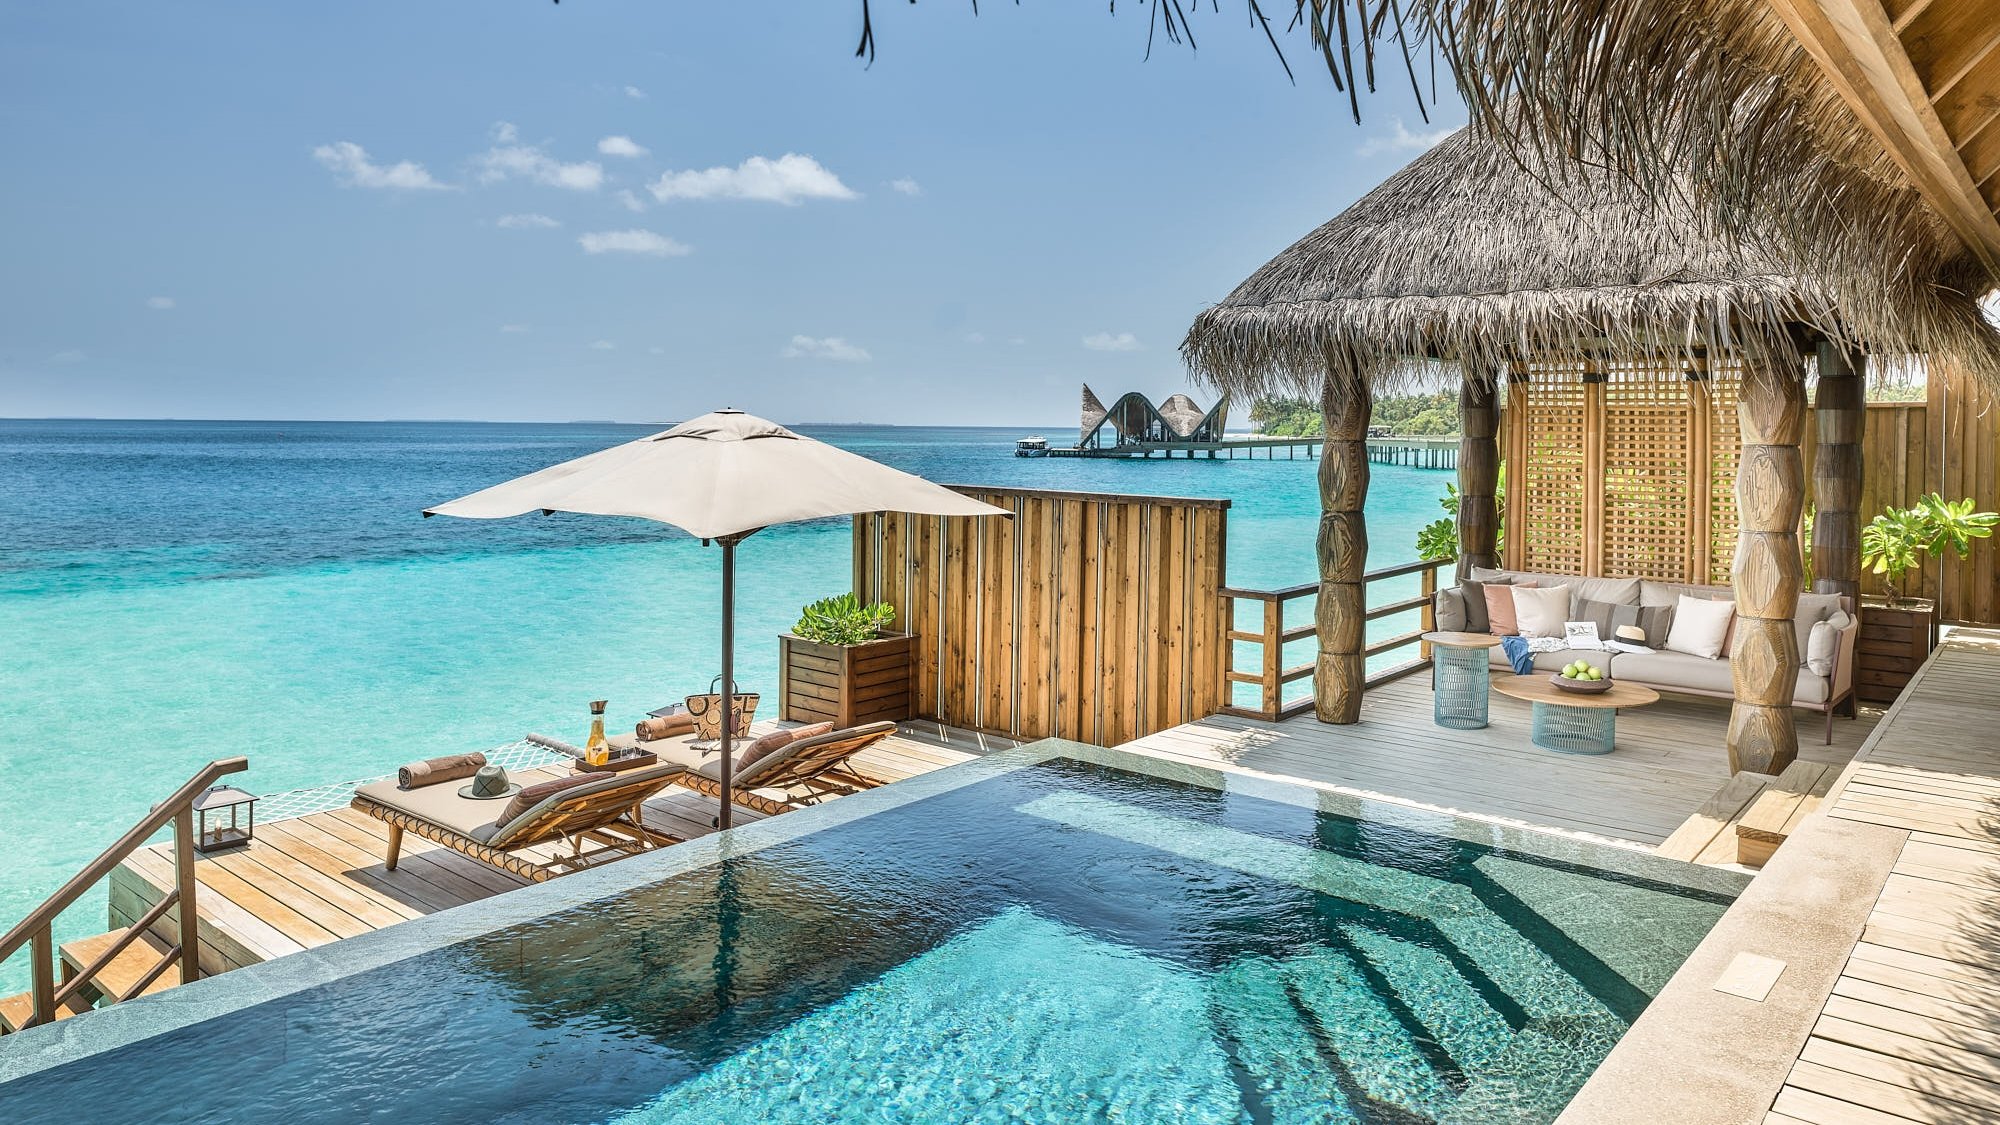 Take a dip in the pristine waters of the Indian Ocean or relax in your infinity pool at Joali